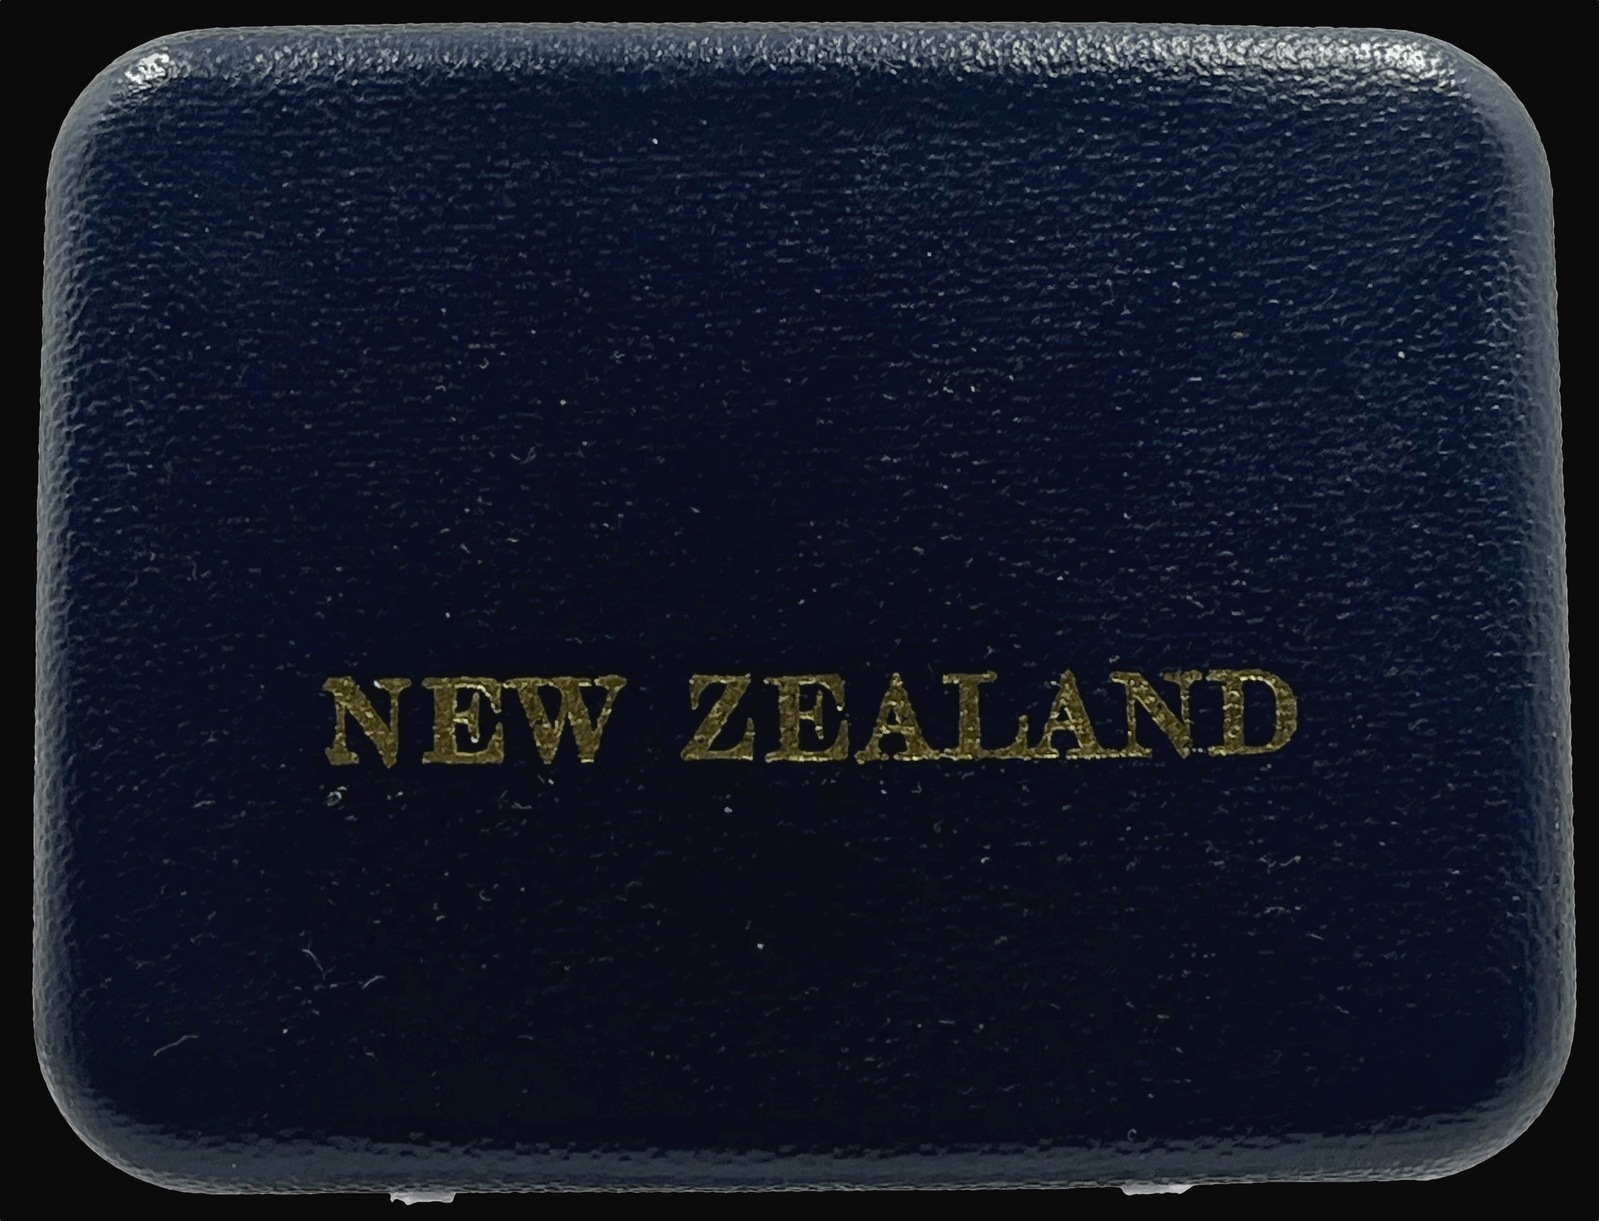 New Zealand 1974 One Dollar Silver Proof Coin - Commonwealth Games product image